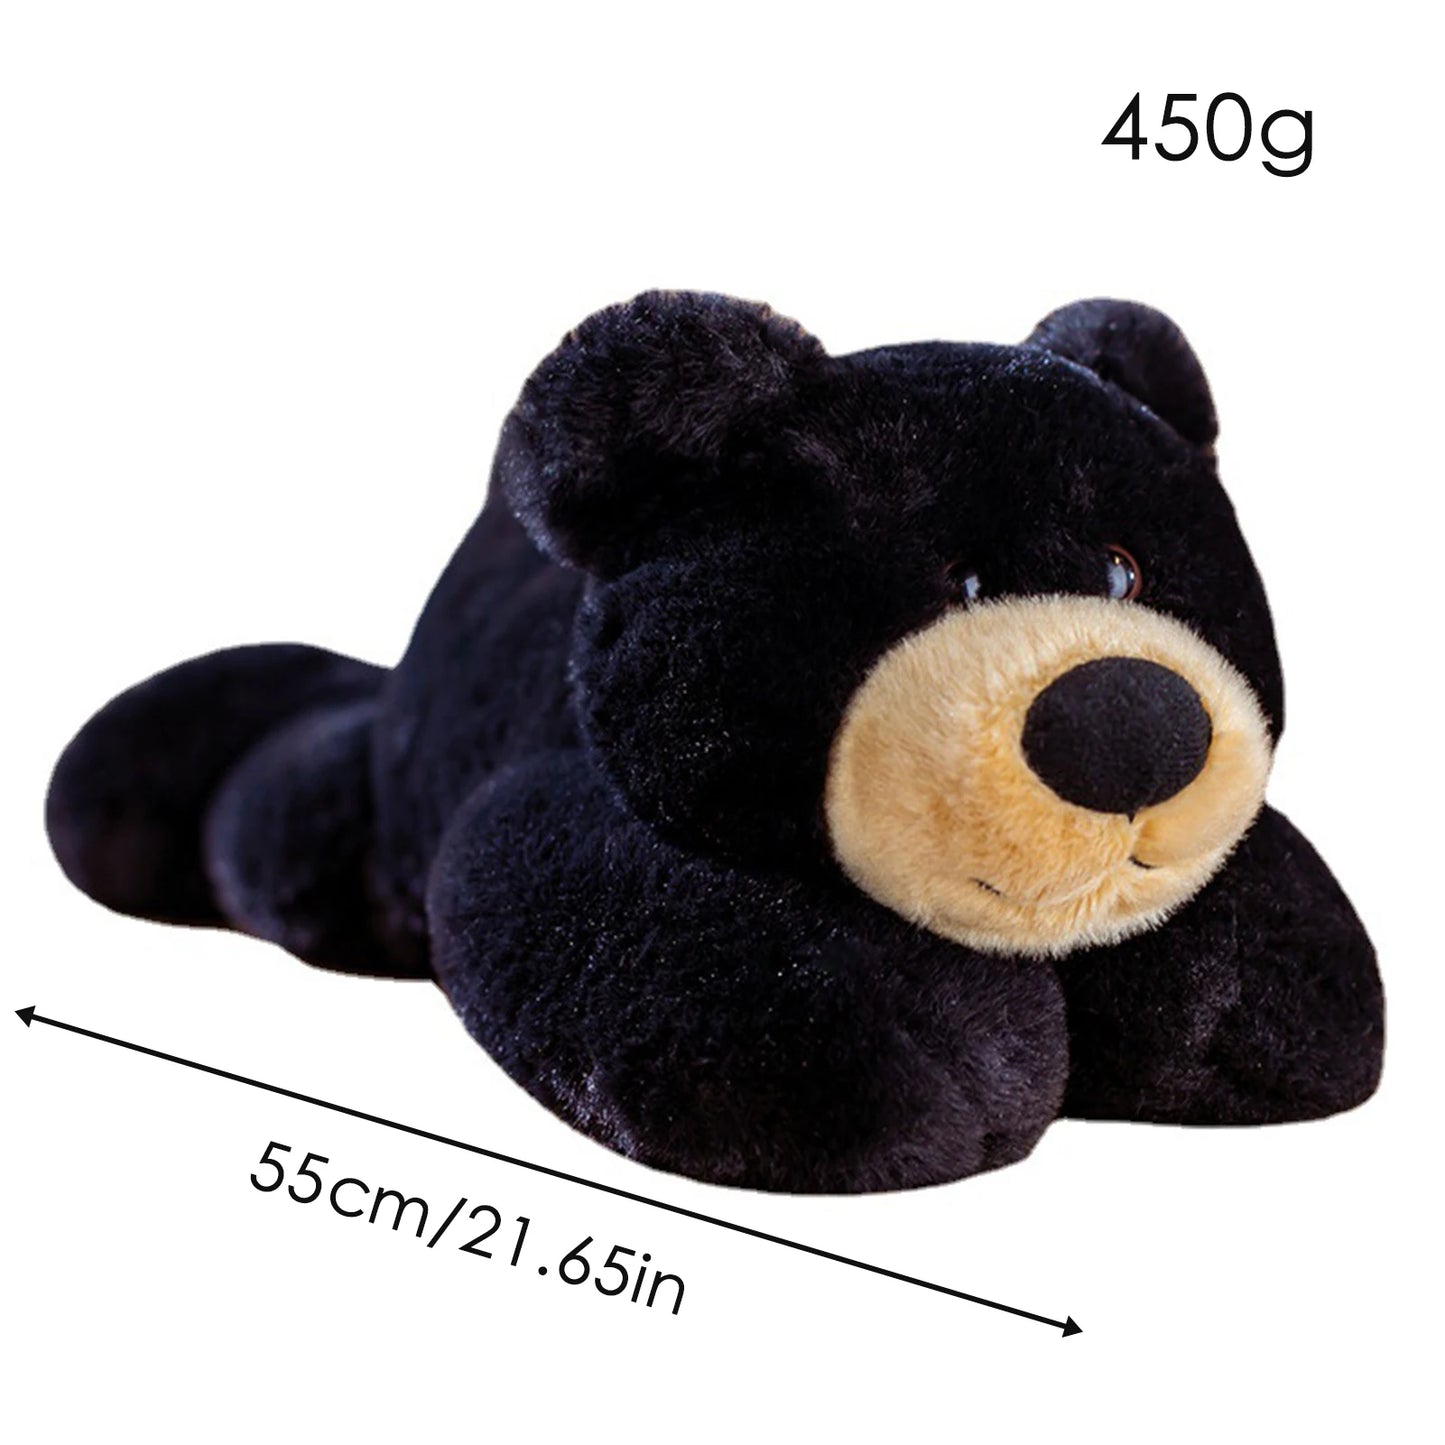 Weighted Stuffed Plush Relieve Anxiety